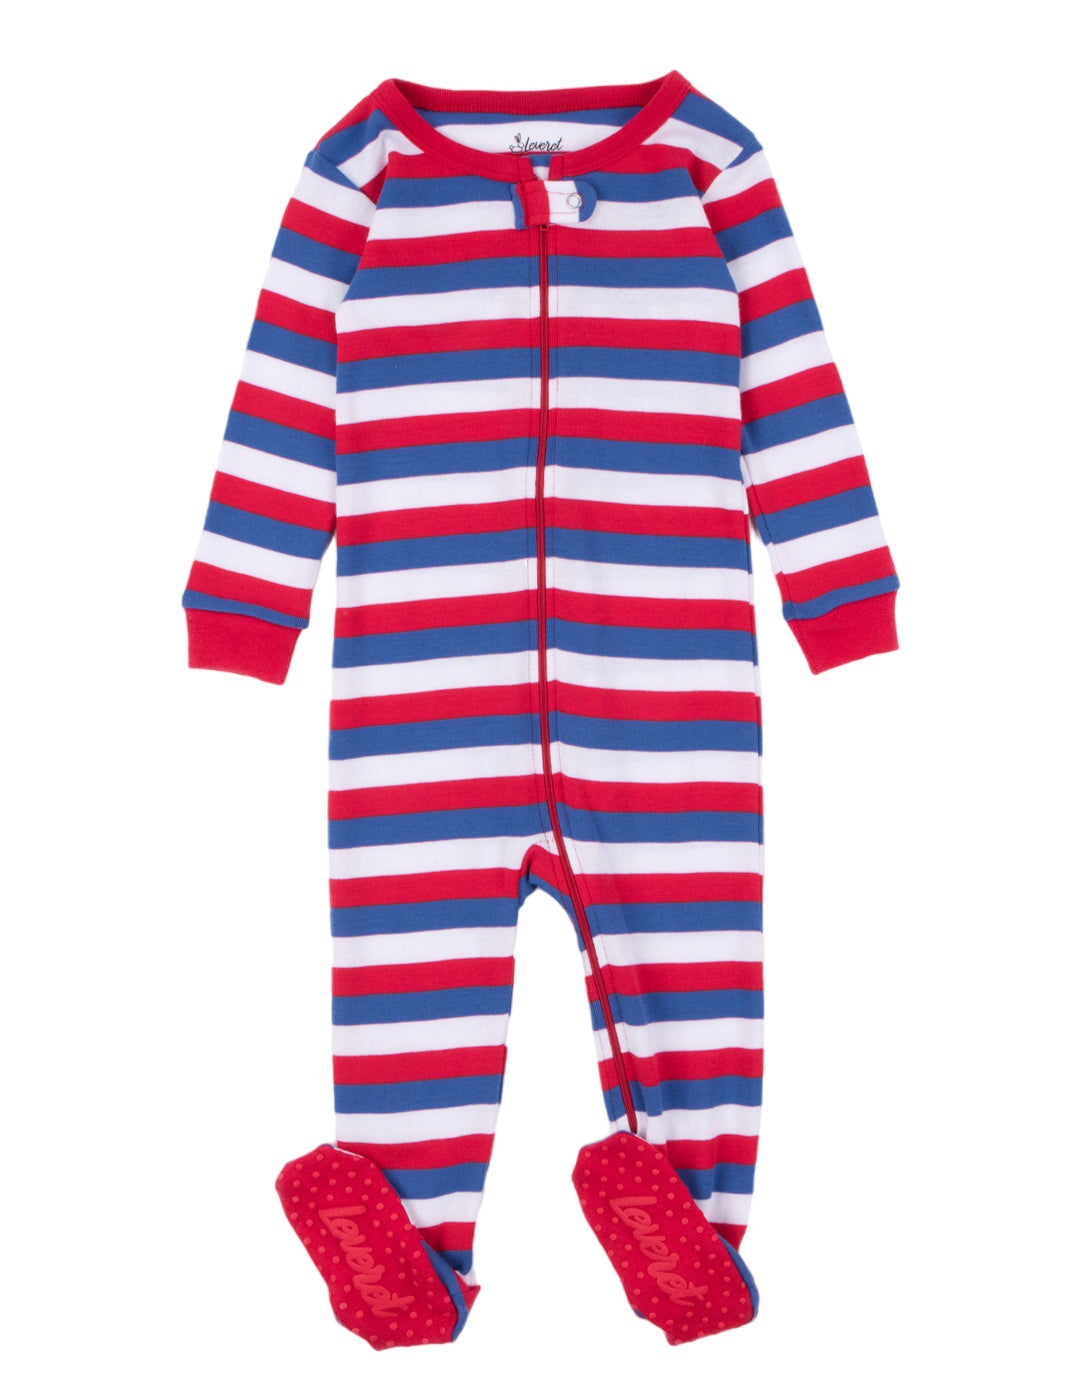 Kids Footed Cotton Red White & Blue Stripes Pajamas